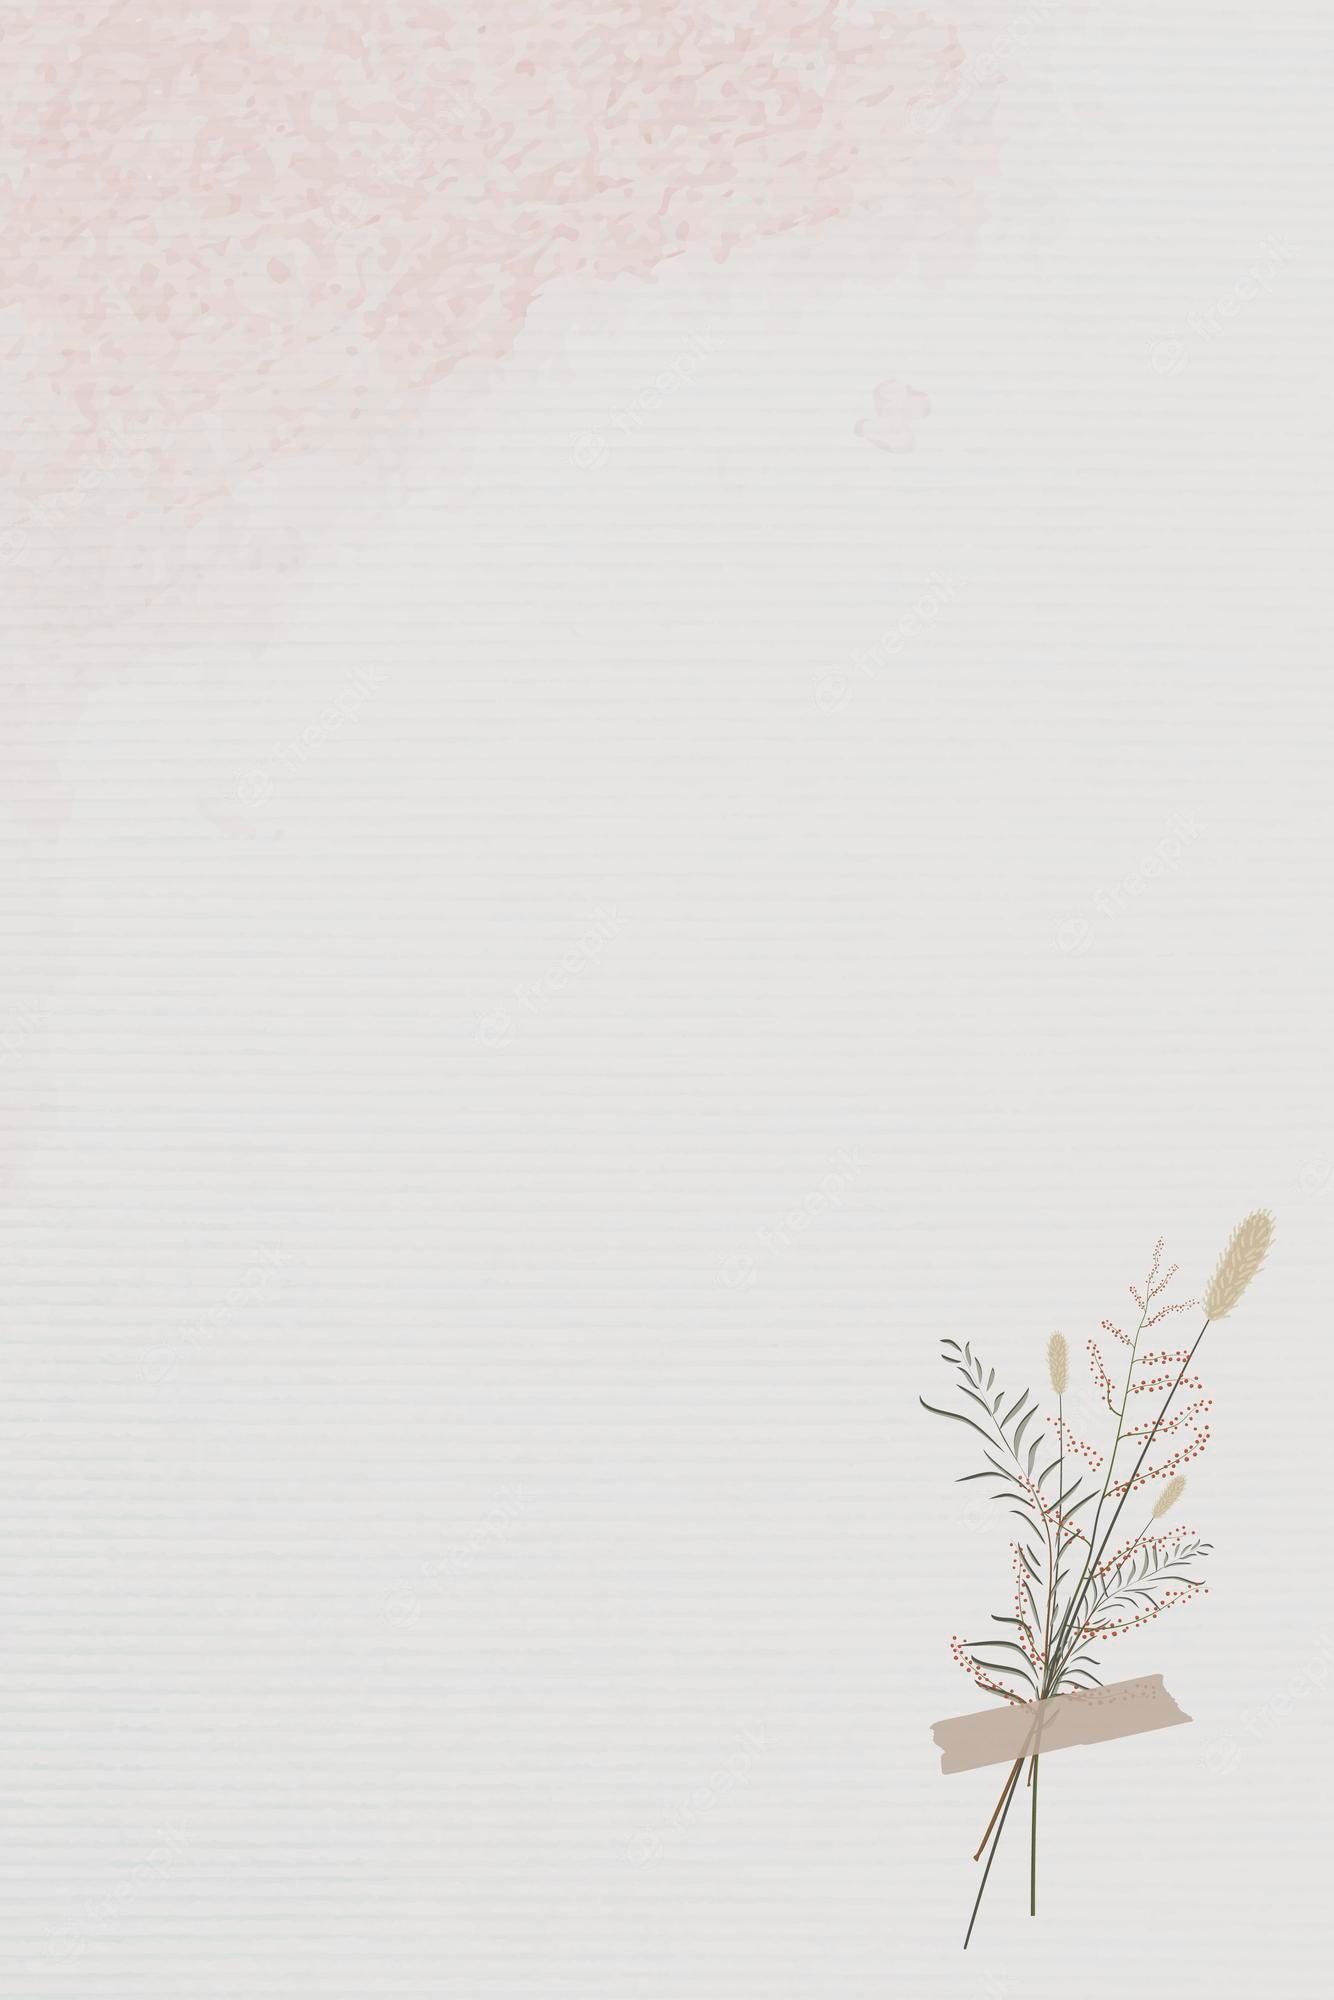 A white background with pink flowers - Design